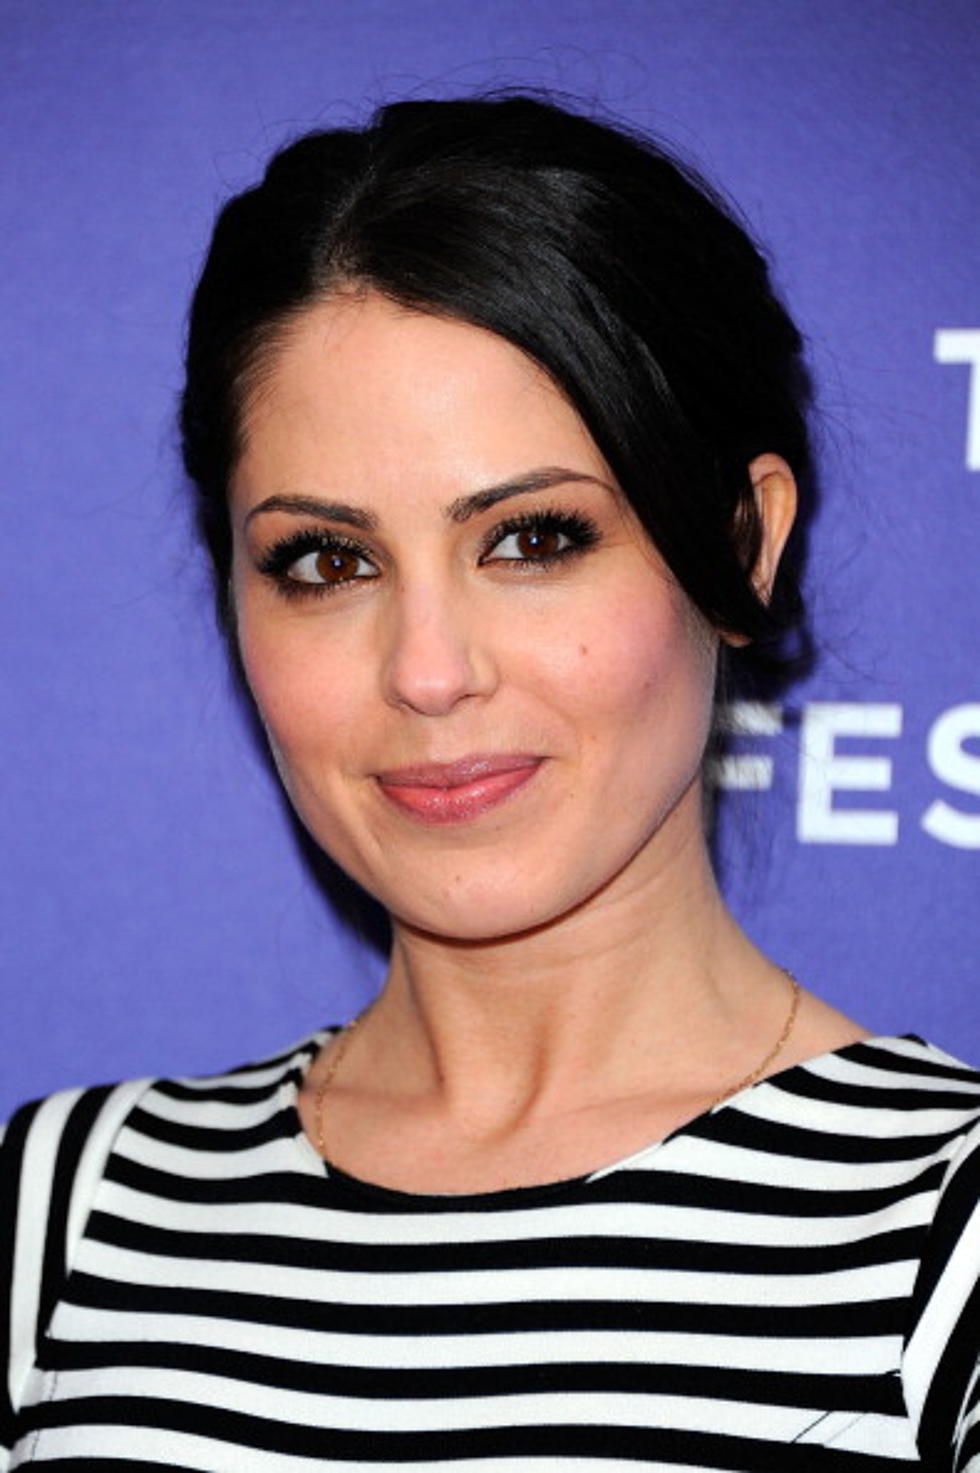 Michelle Borth Talks With Big Jim & Stacy Lee About ABC’s “Combat Hospital” [INTERVIEW]